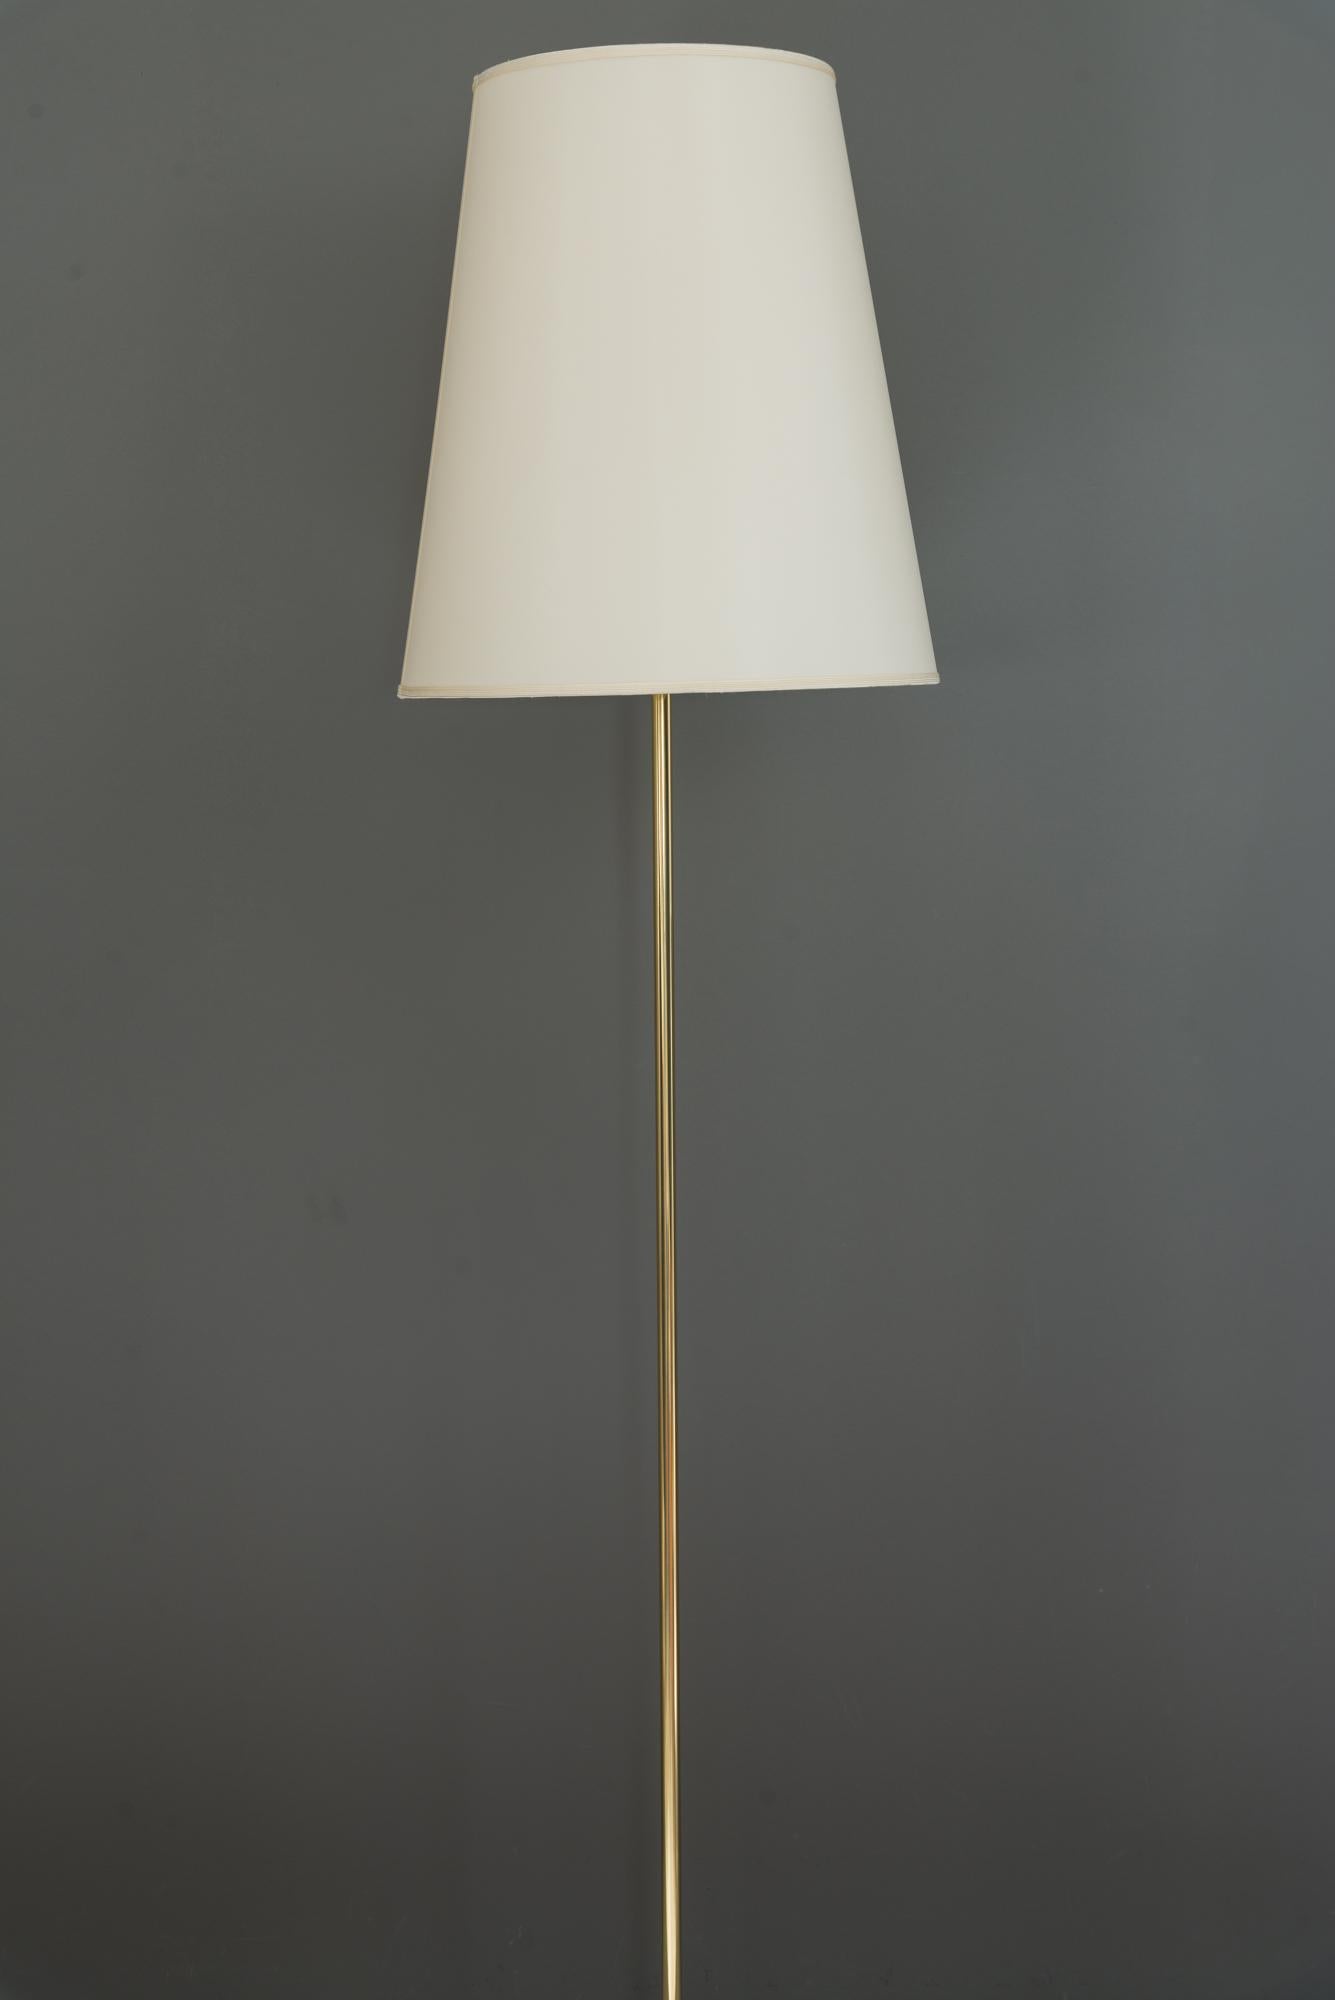 Kalmar floor lamp with fabric shade circa 1950s
Brass polished and stove enameled
The fabric shade is replaced ( new ).